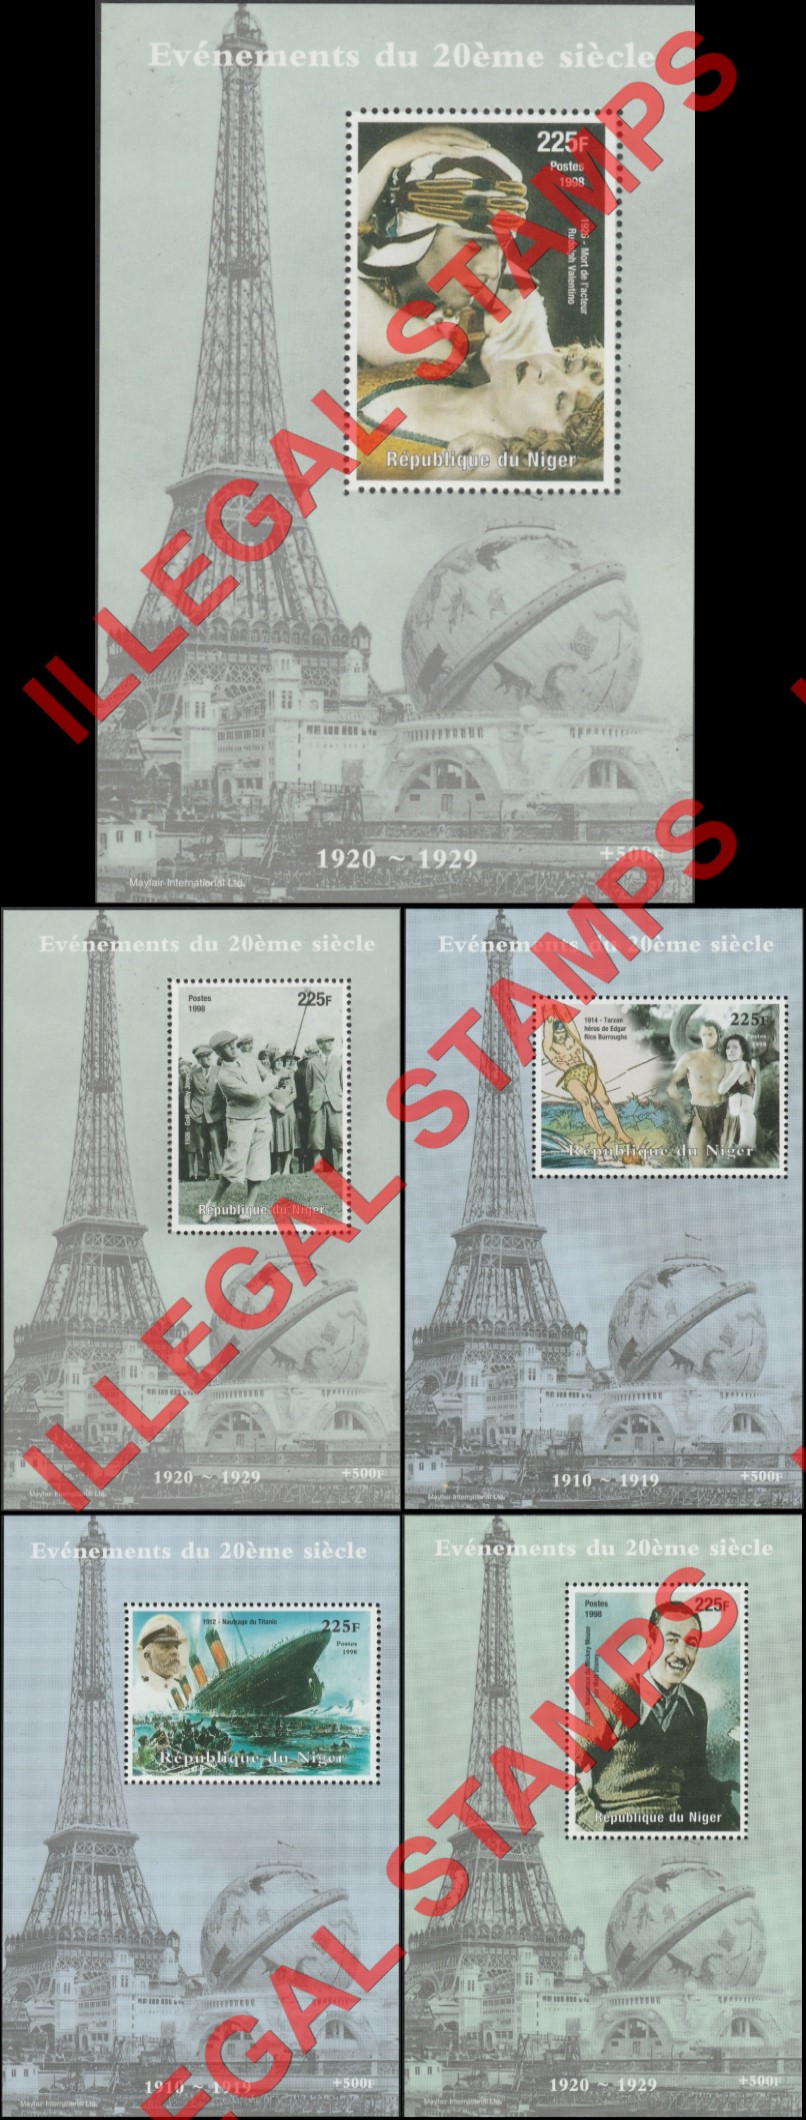 Niger 1998 Events of the 20th Century 225F Illegal Stamp Souvenir Sheets of 1 (Part 1)